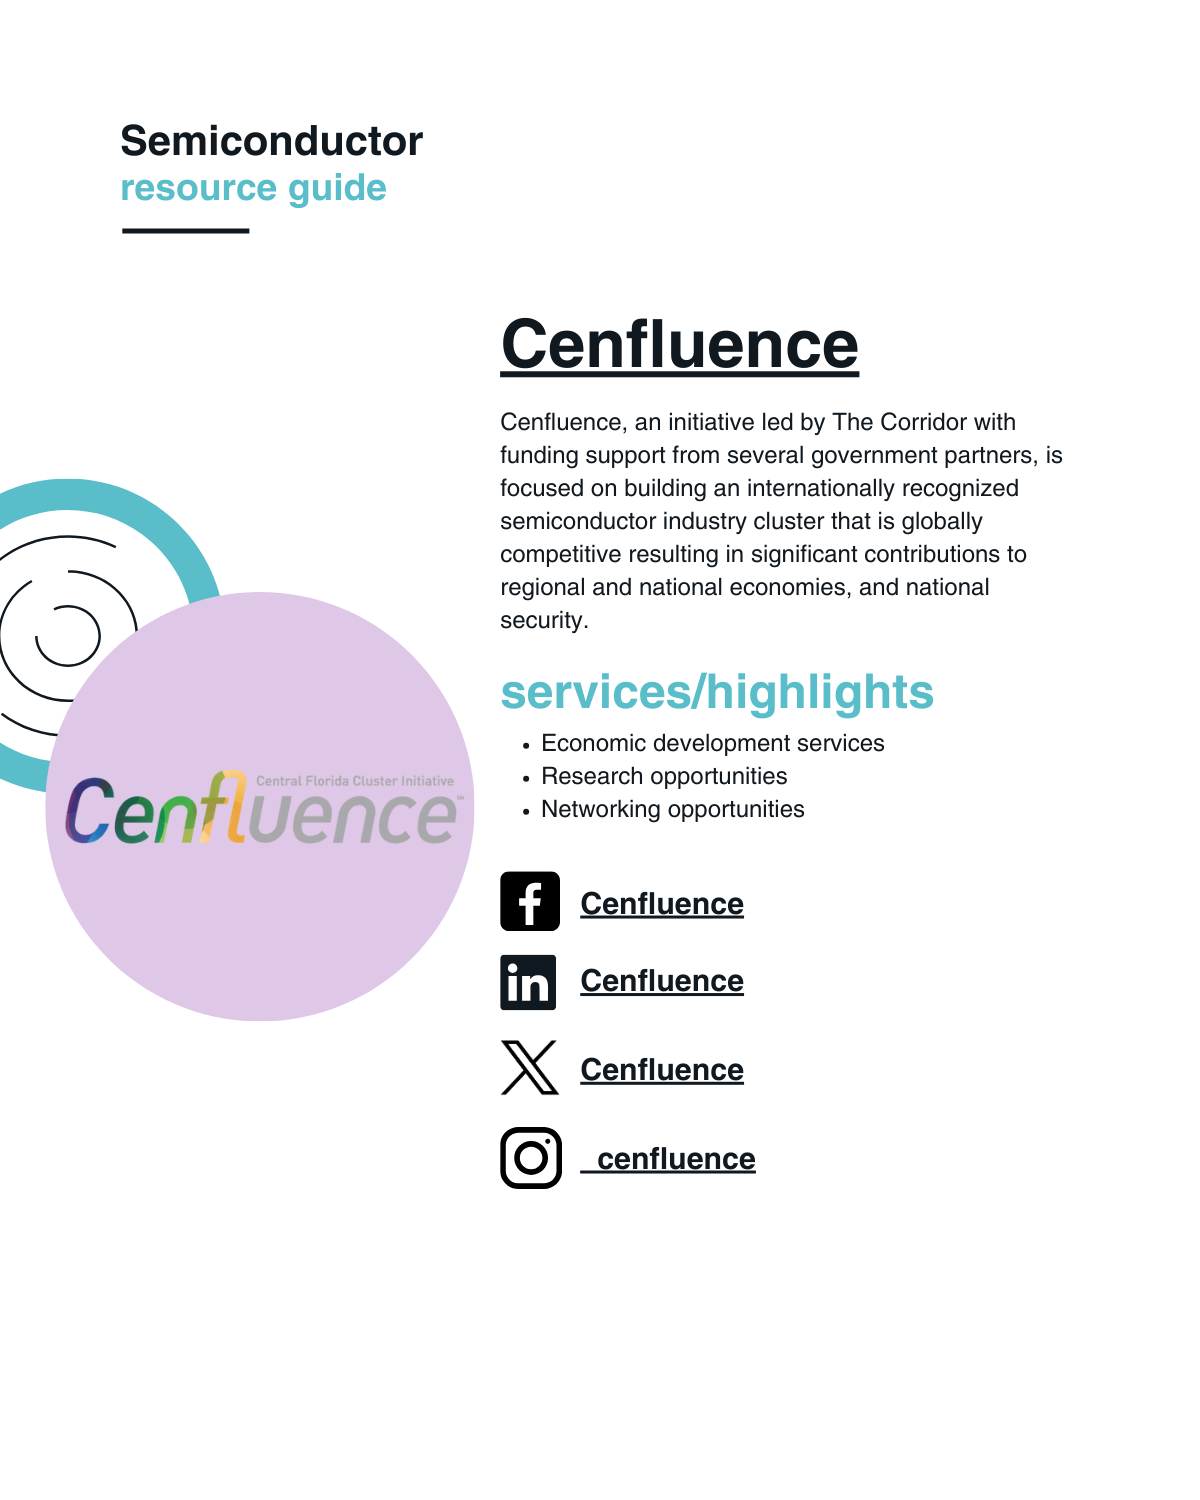 Cenfluence, an initiative led by The Corridor with funding support from several government partners, is focused on building an internationally recognized semiconductor industry cluster that is globally competitive resulting in significant contributions to regional and national economies, and national security.